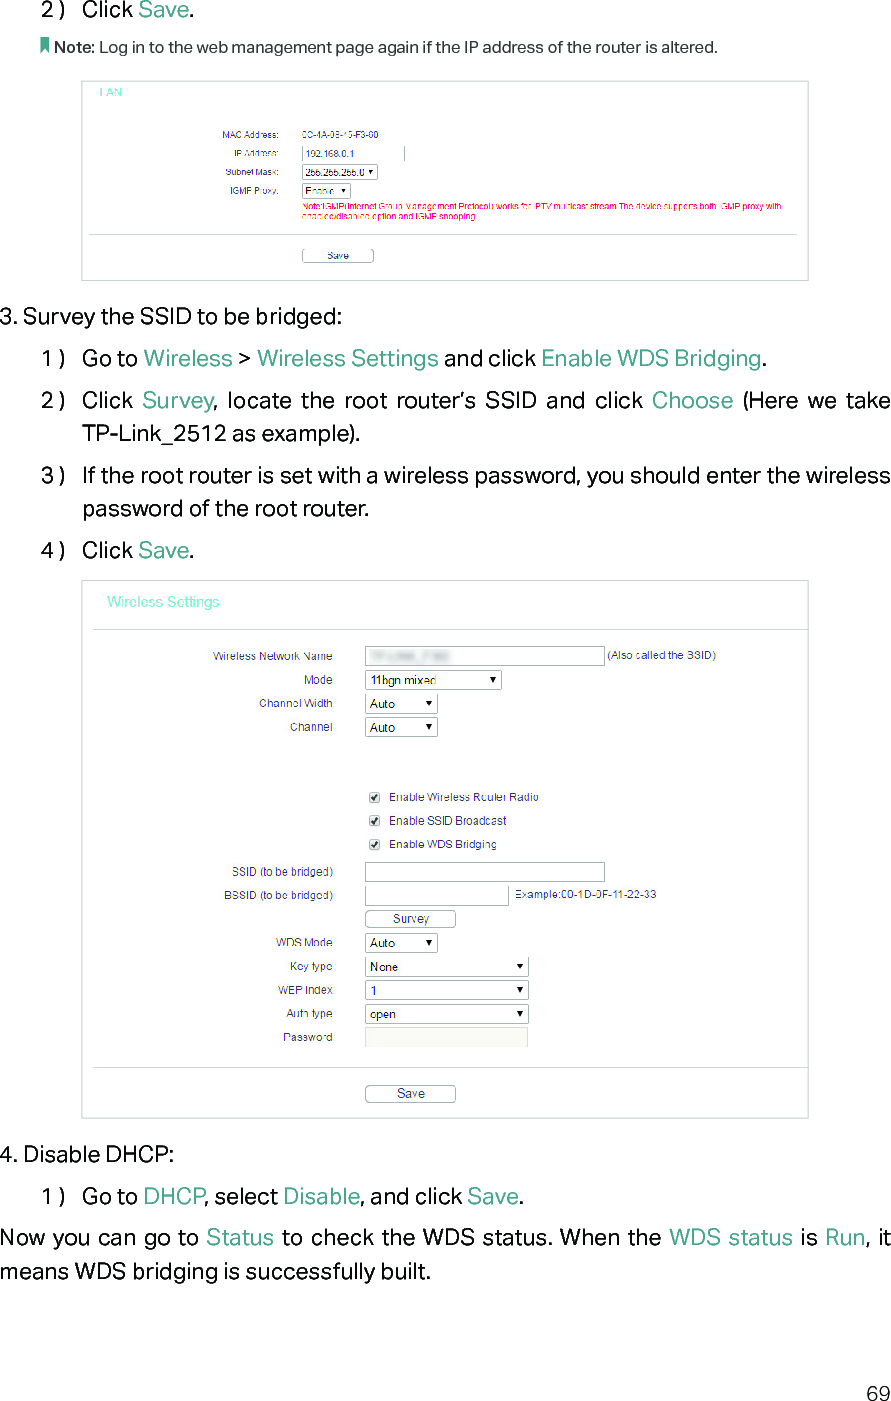 692 )  Click Save.Note: Log in to the web management page again if the IP address of the router is altered.3. Survey the SSID to be bridged:1 )  Go to Wireless &gt; Wireless Settings and click Enable WDS Bridging.2 )  Click  Survey, locate the root router’s SSID and click Choose  (Here we take  TP-Link_2512 as example).3 )  If the root router is set with a wireless password, you should enter the wireless password of the root router.4 )  Click Save.4. Disable DHCP:1 )  Go to DHCP, select Disable, and click Save.Now you can go to Status to check the WDS status. When the WDS status is Run, it means WDS bridging is successfully built.